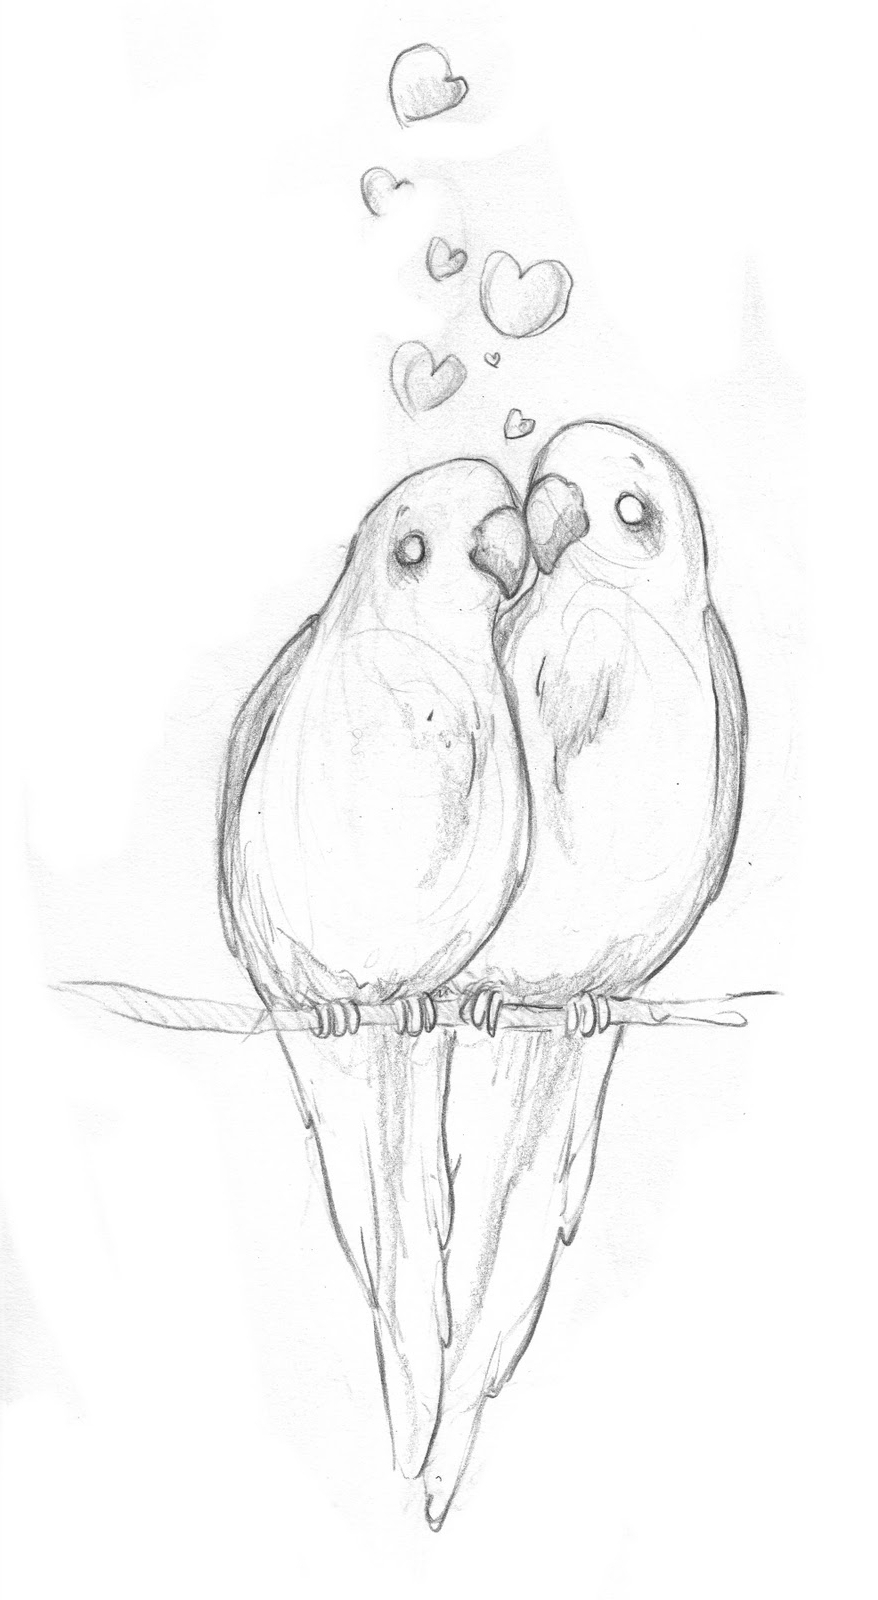 Drawing Birds Love Max Installer See more ideas about bird pencil drawing, human figure sketches, bird. drawing birds love max installer